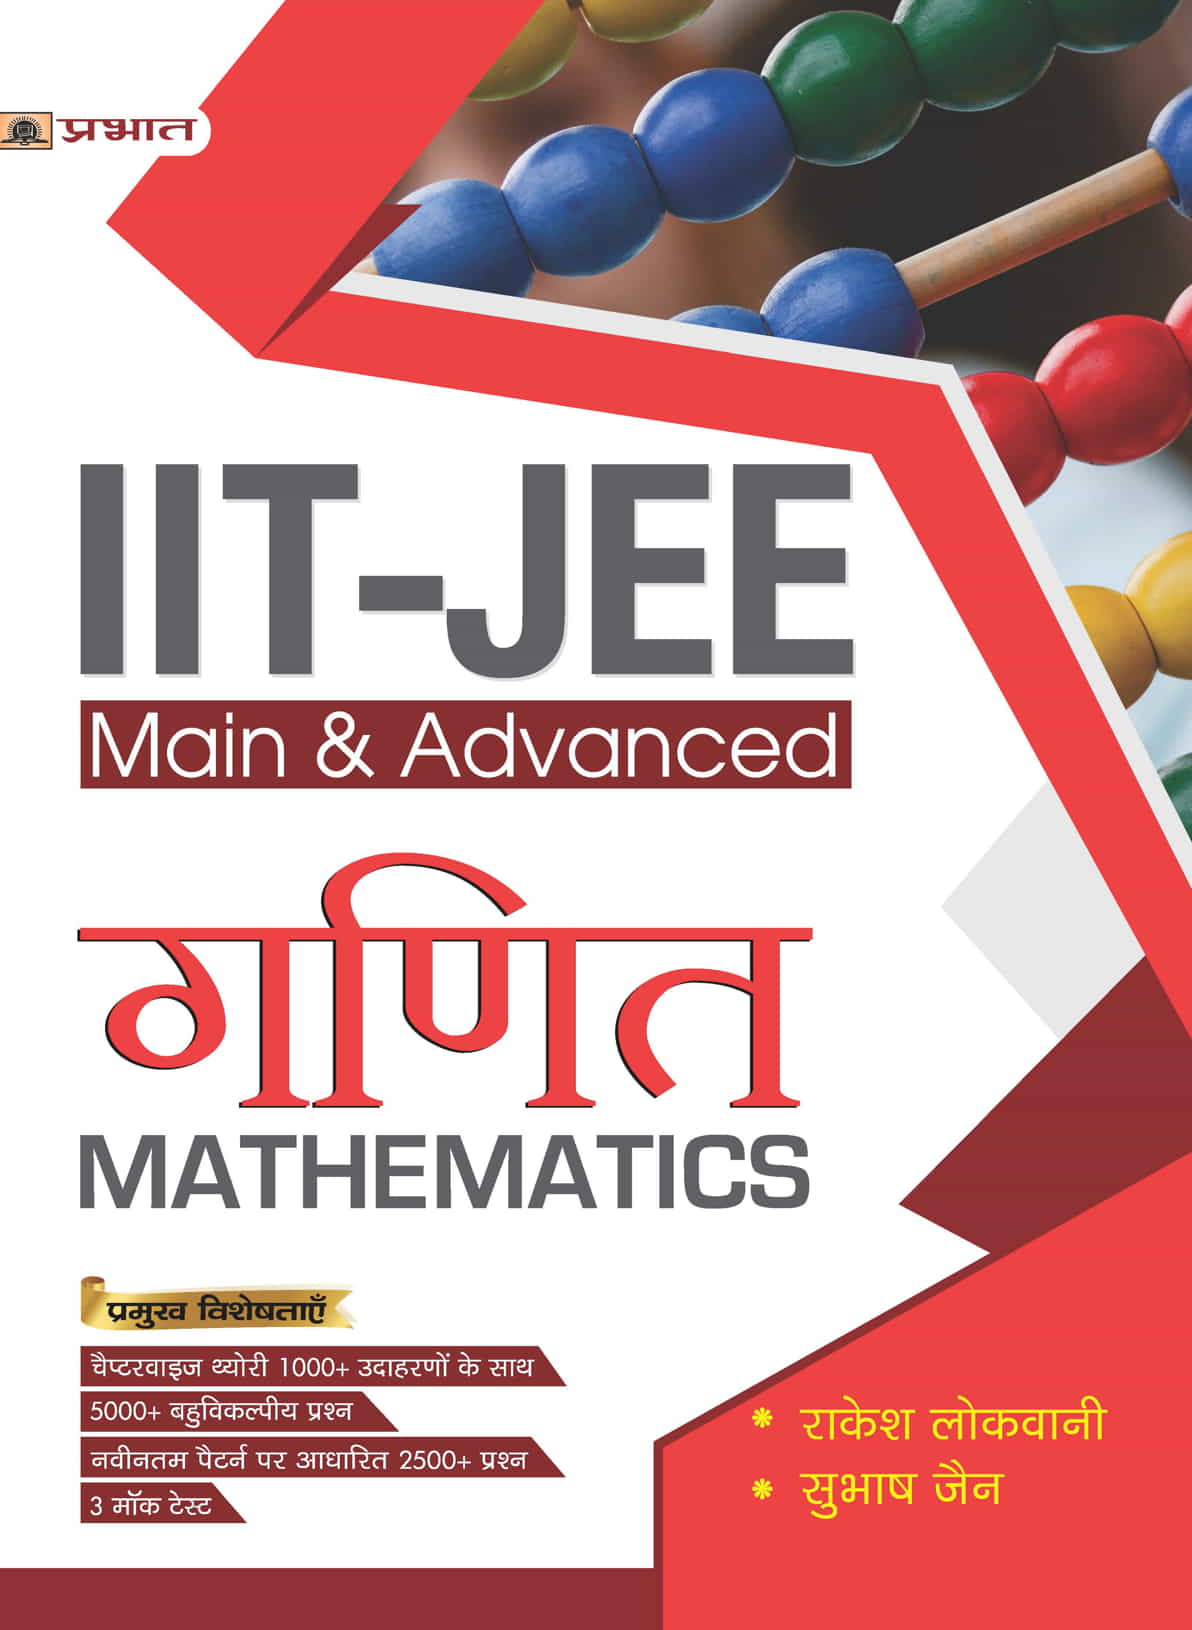 IIT-JEE Main + Advanced Ganit (Mathematics) for JEE Main + JEE Advanced and NEET (Other Engineering Entrance Examinations)